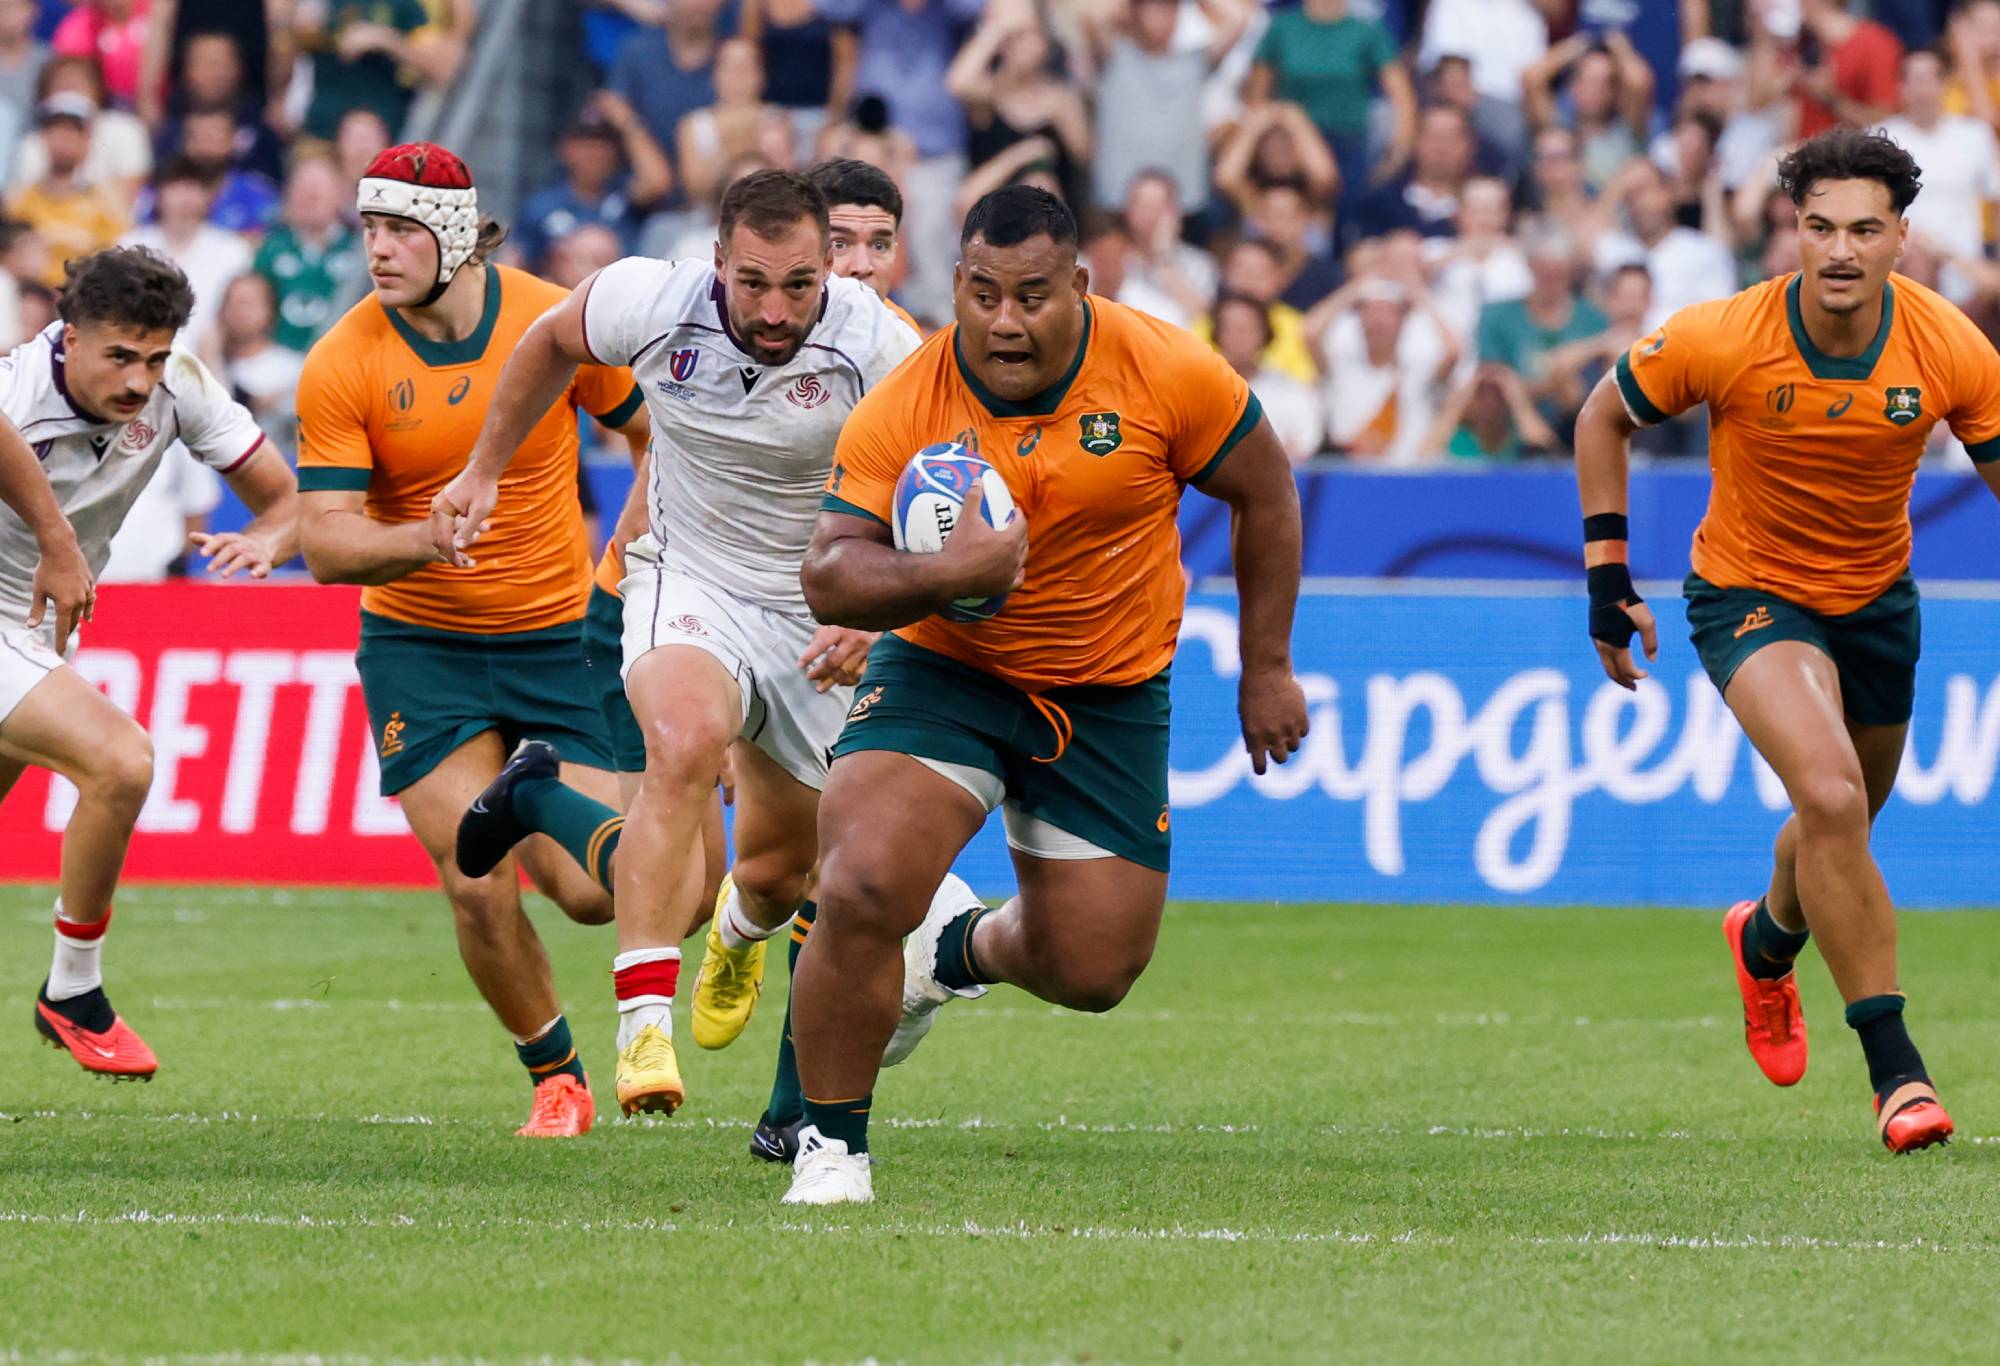 Taniela Tupou #3 of Australia runs with the ball during the Rugby World Cup France 2023 match between Australia and Georgia at Stade de France on September 9, 2023 in Paris, France. (Photo by Catherine Steenkeste/Getty Images)